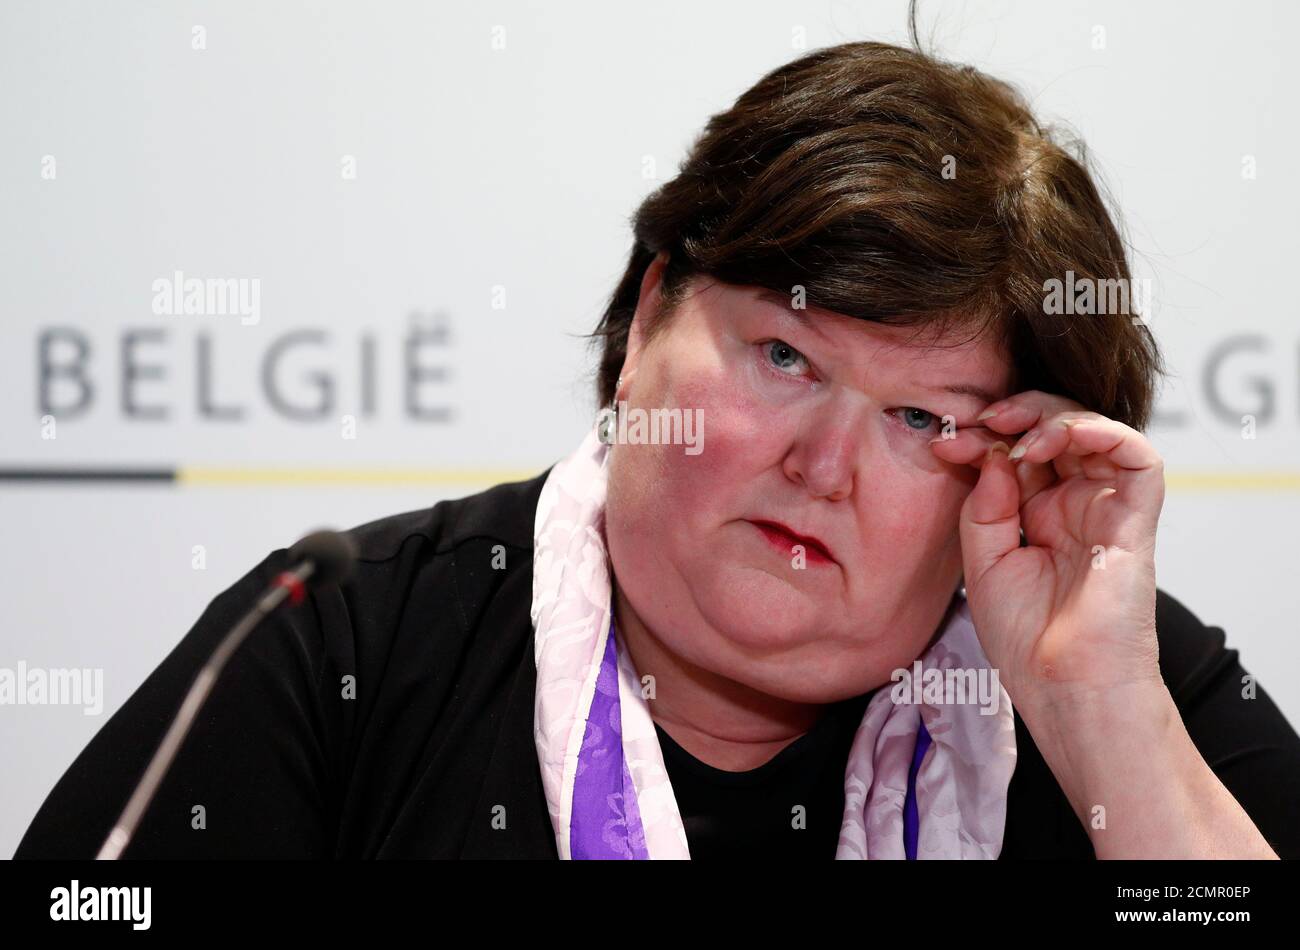 Belgium's Health Minister Maggie De Block speaks during an interview with  Reuters amid the coronavirus disease (COVID-19) outbreak in Brussels,  Belgium July 10, 2020. REUTERS/Francois Lenoir Stock Photo - Alamy